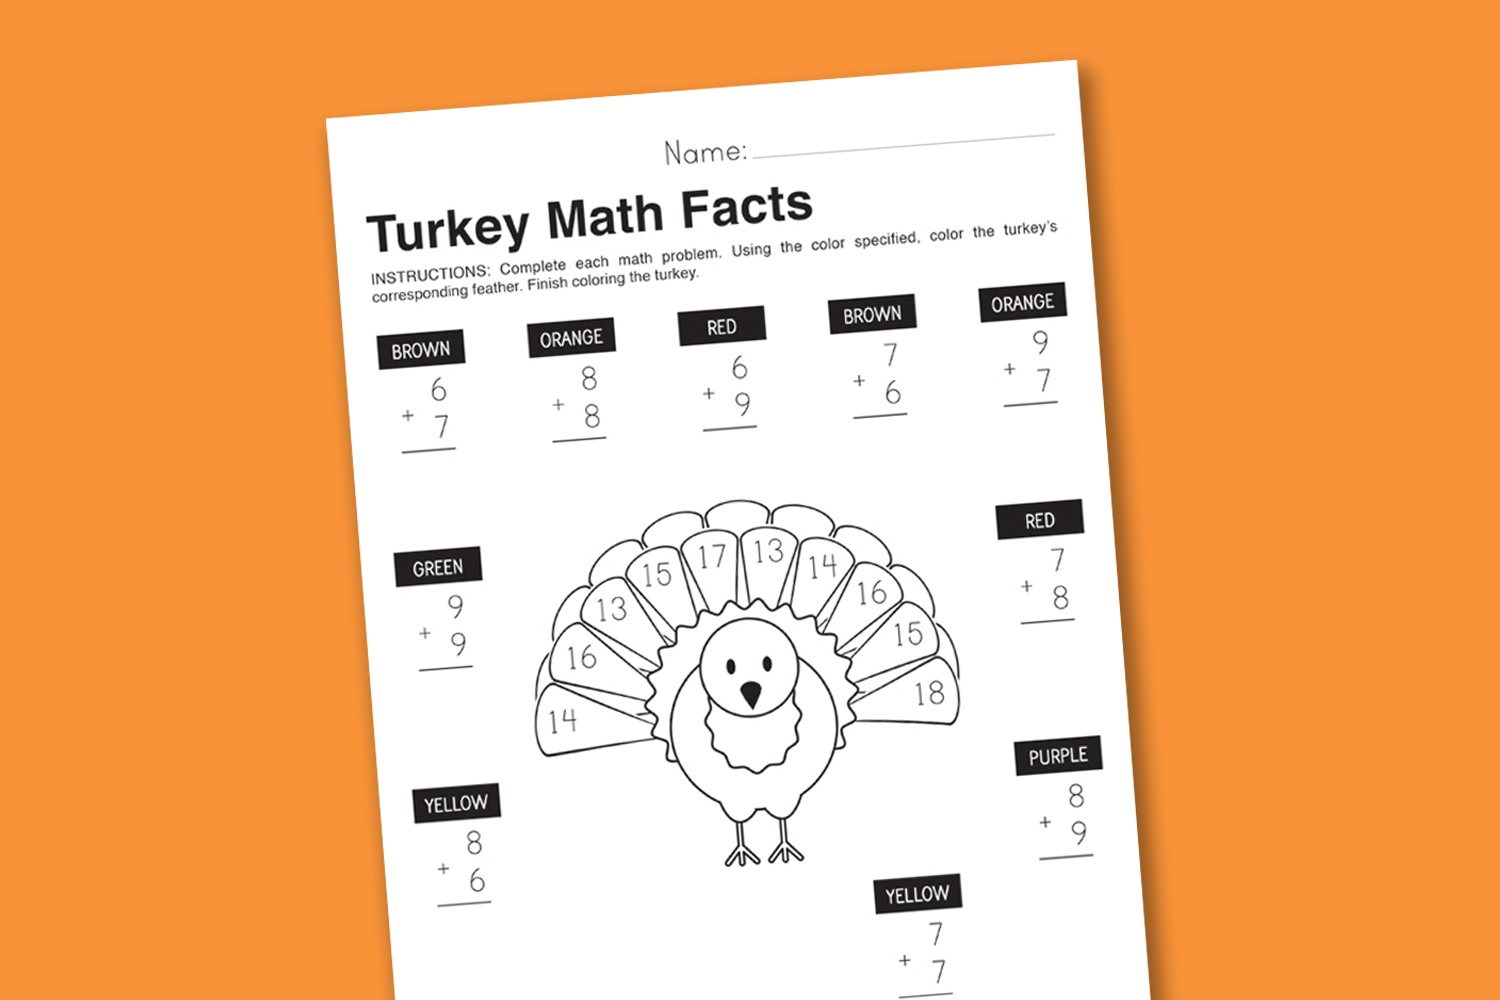 Worksheet Wednesday: Turkey Math Facts - Paging Supermom - Math Worksheets Thanksgiving Free Printable